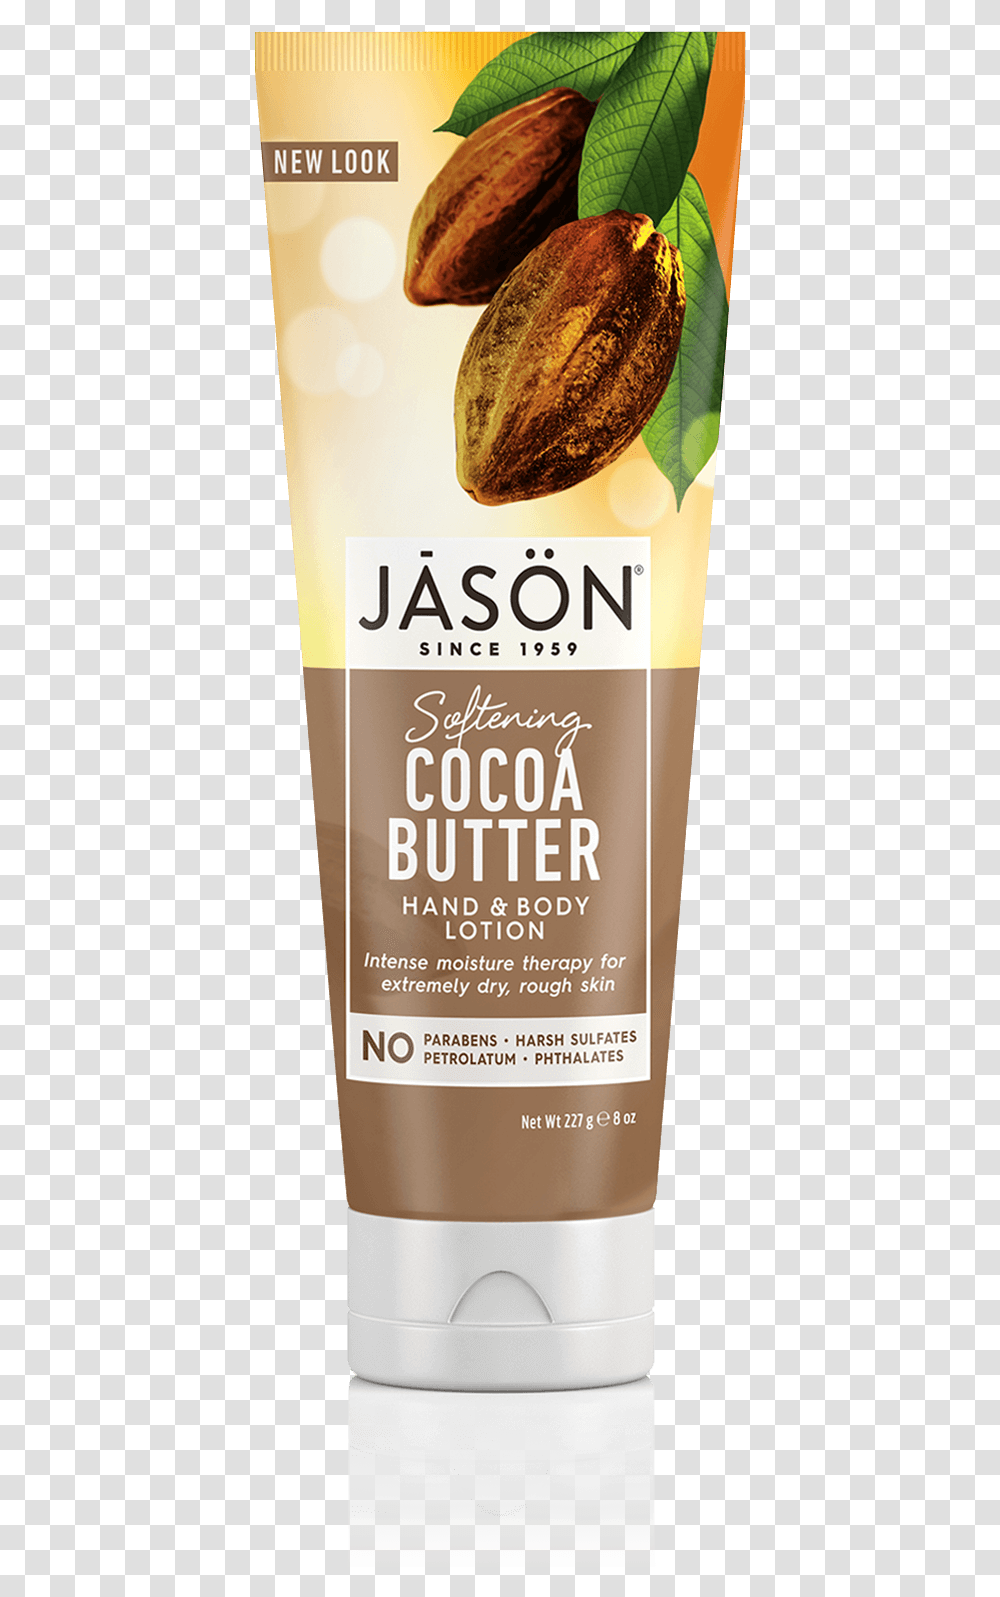 Jason Softening Cocoa Butter Hand And Body Lotion, Bottle, Sunscreen, Cosmetics, Bread Transparent Png